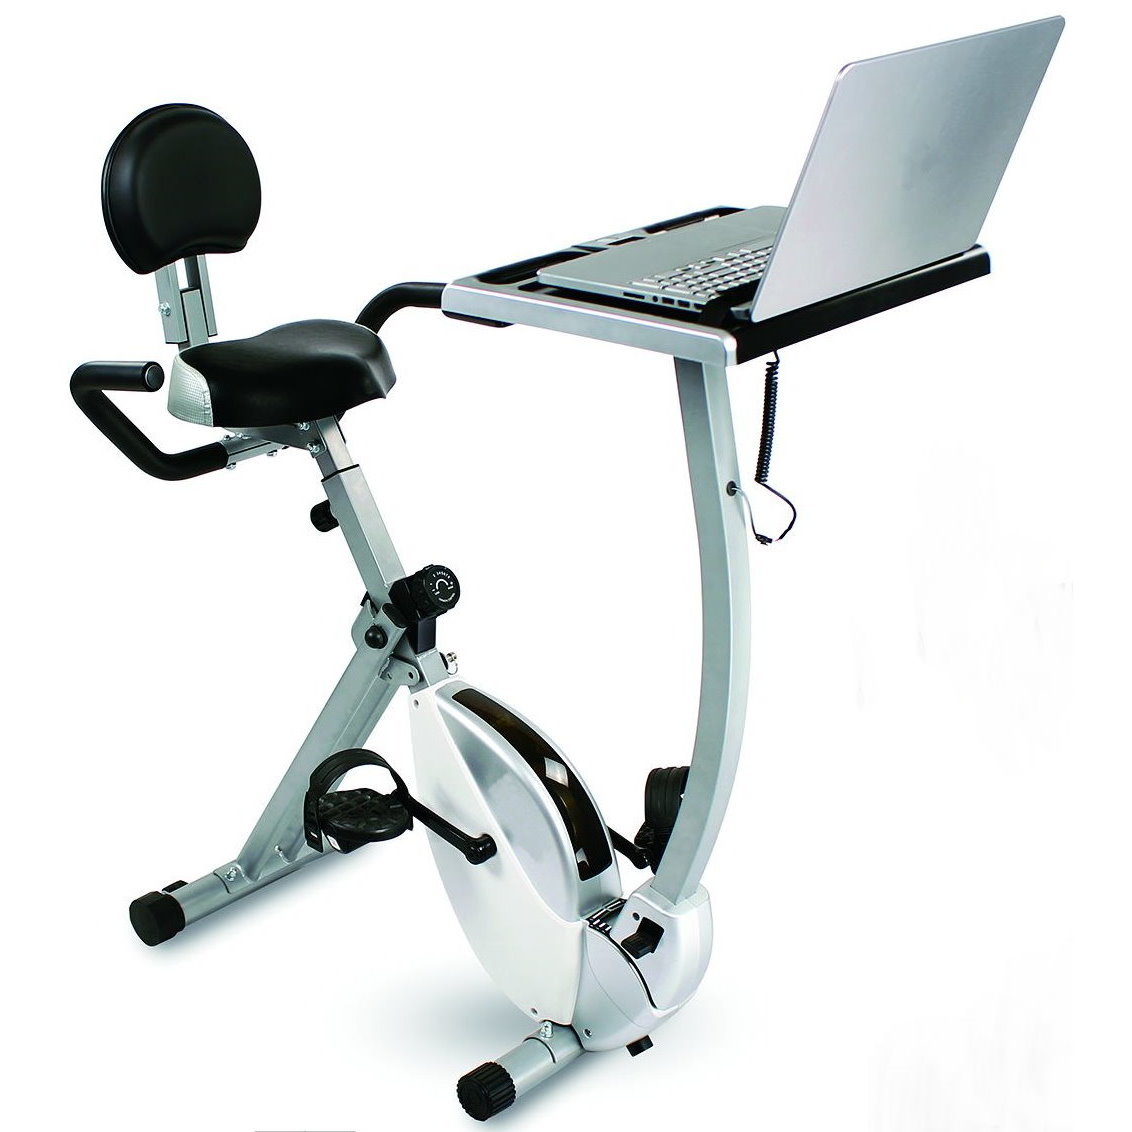 EXERCISE BIKE WITH DESK